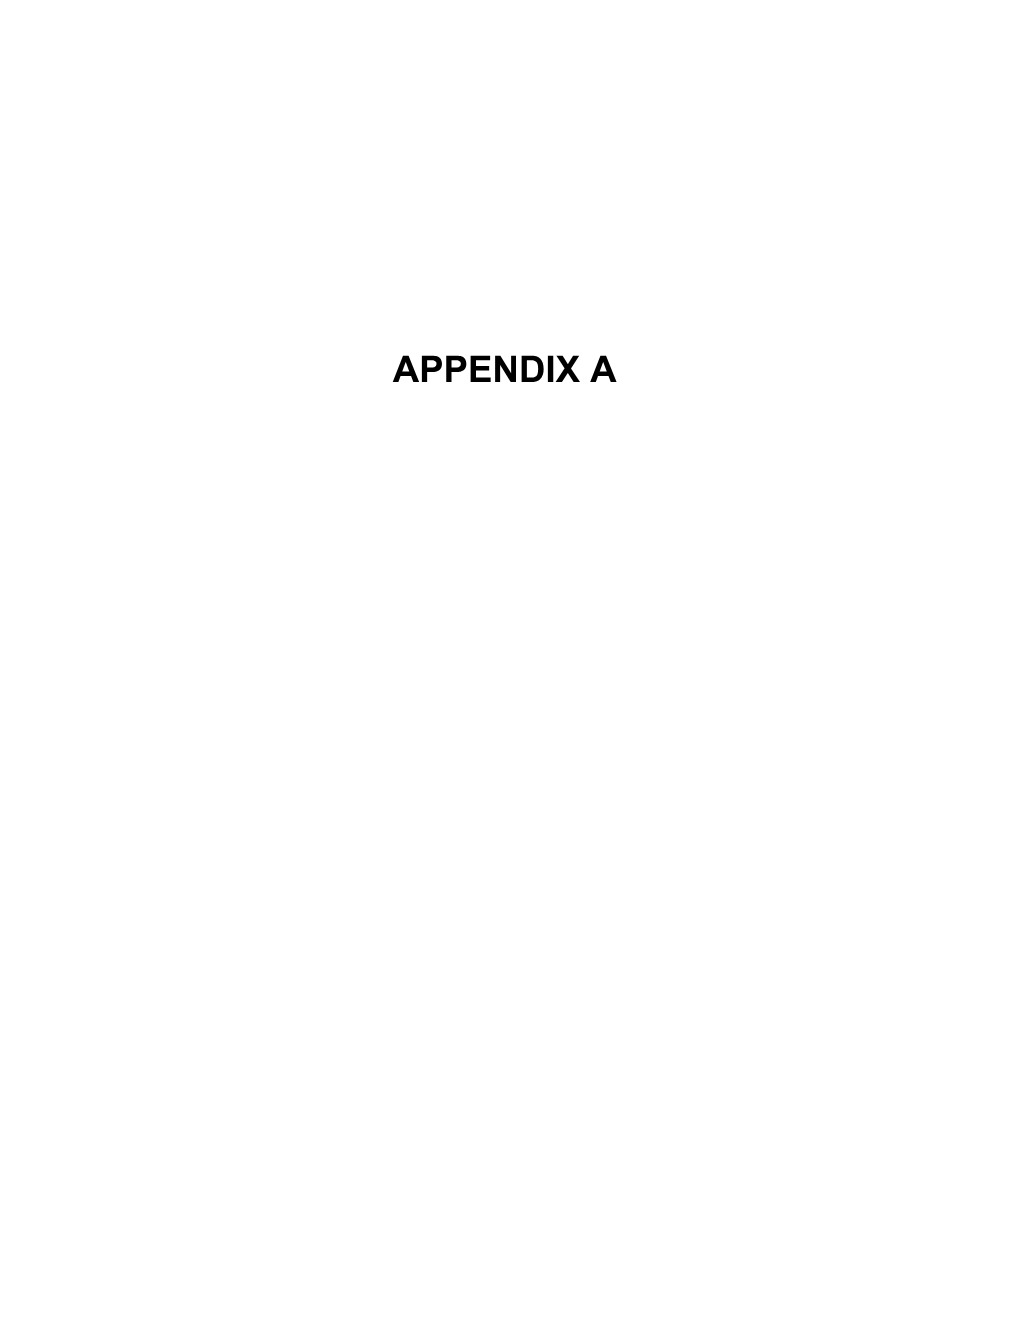 Chapter 18, Appendix a - CAPITAL PROJECTS COMPLETE STREETS CHECKLIST ( 18A-4)